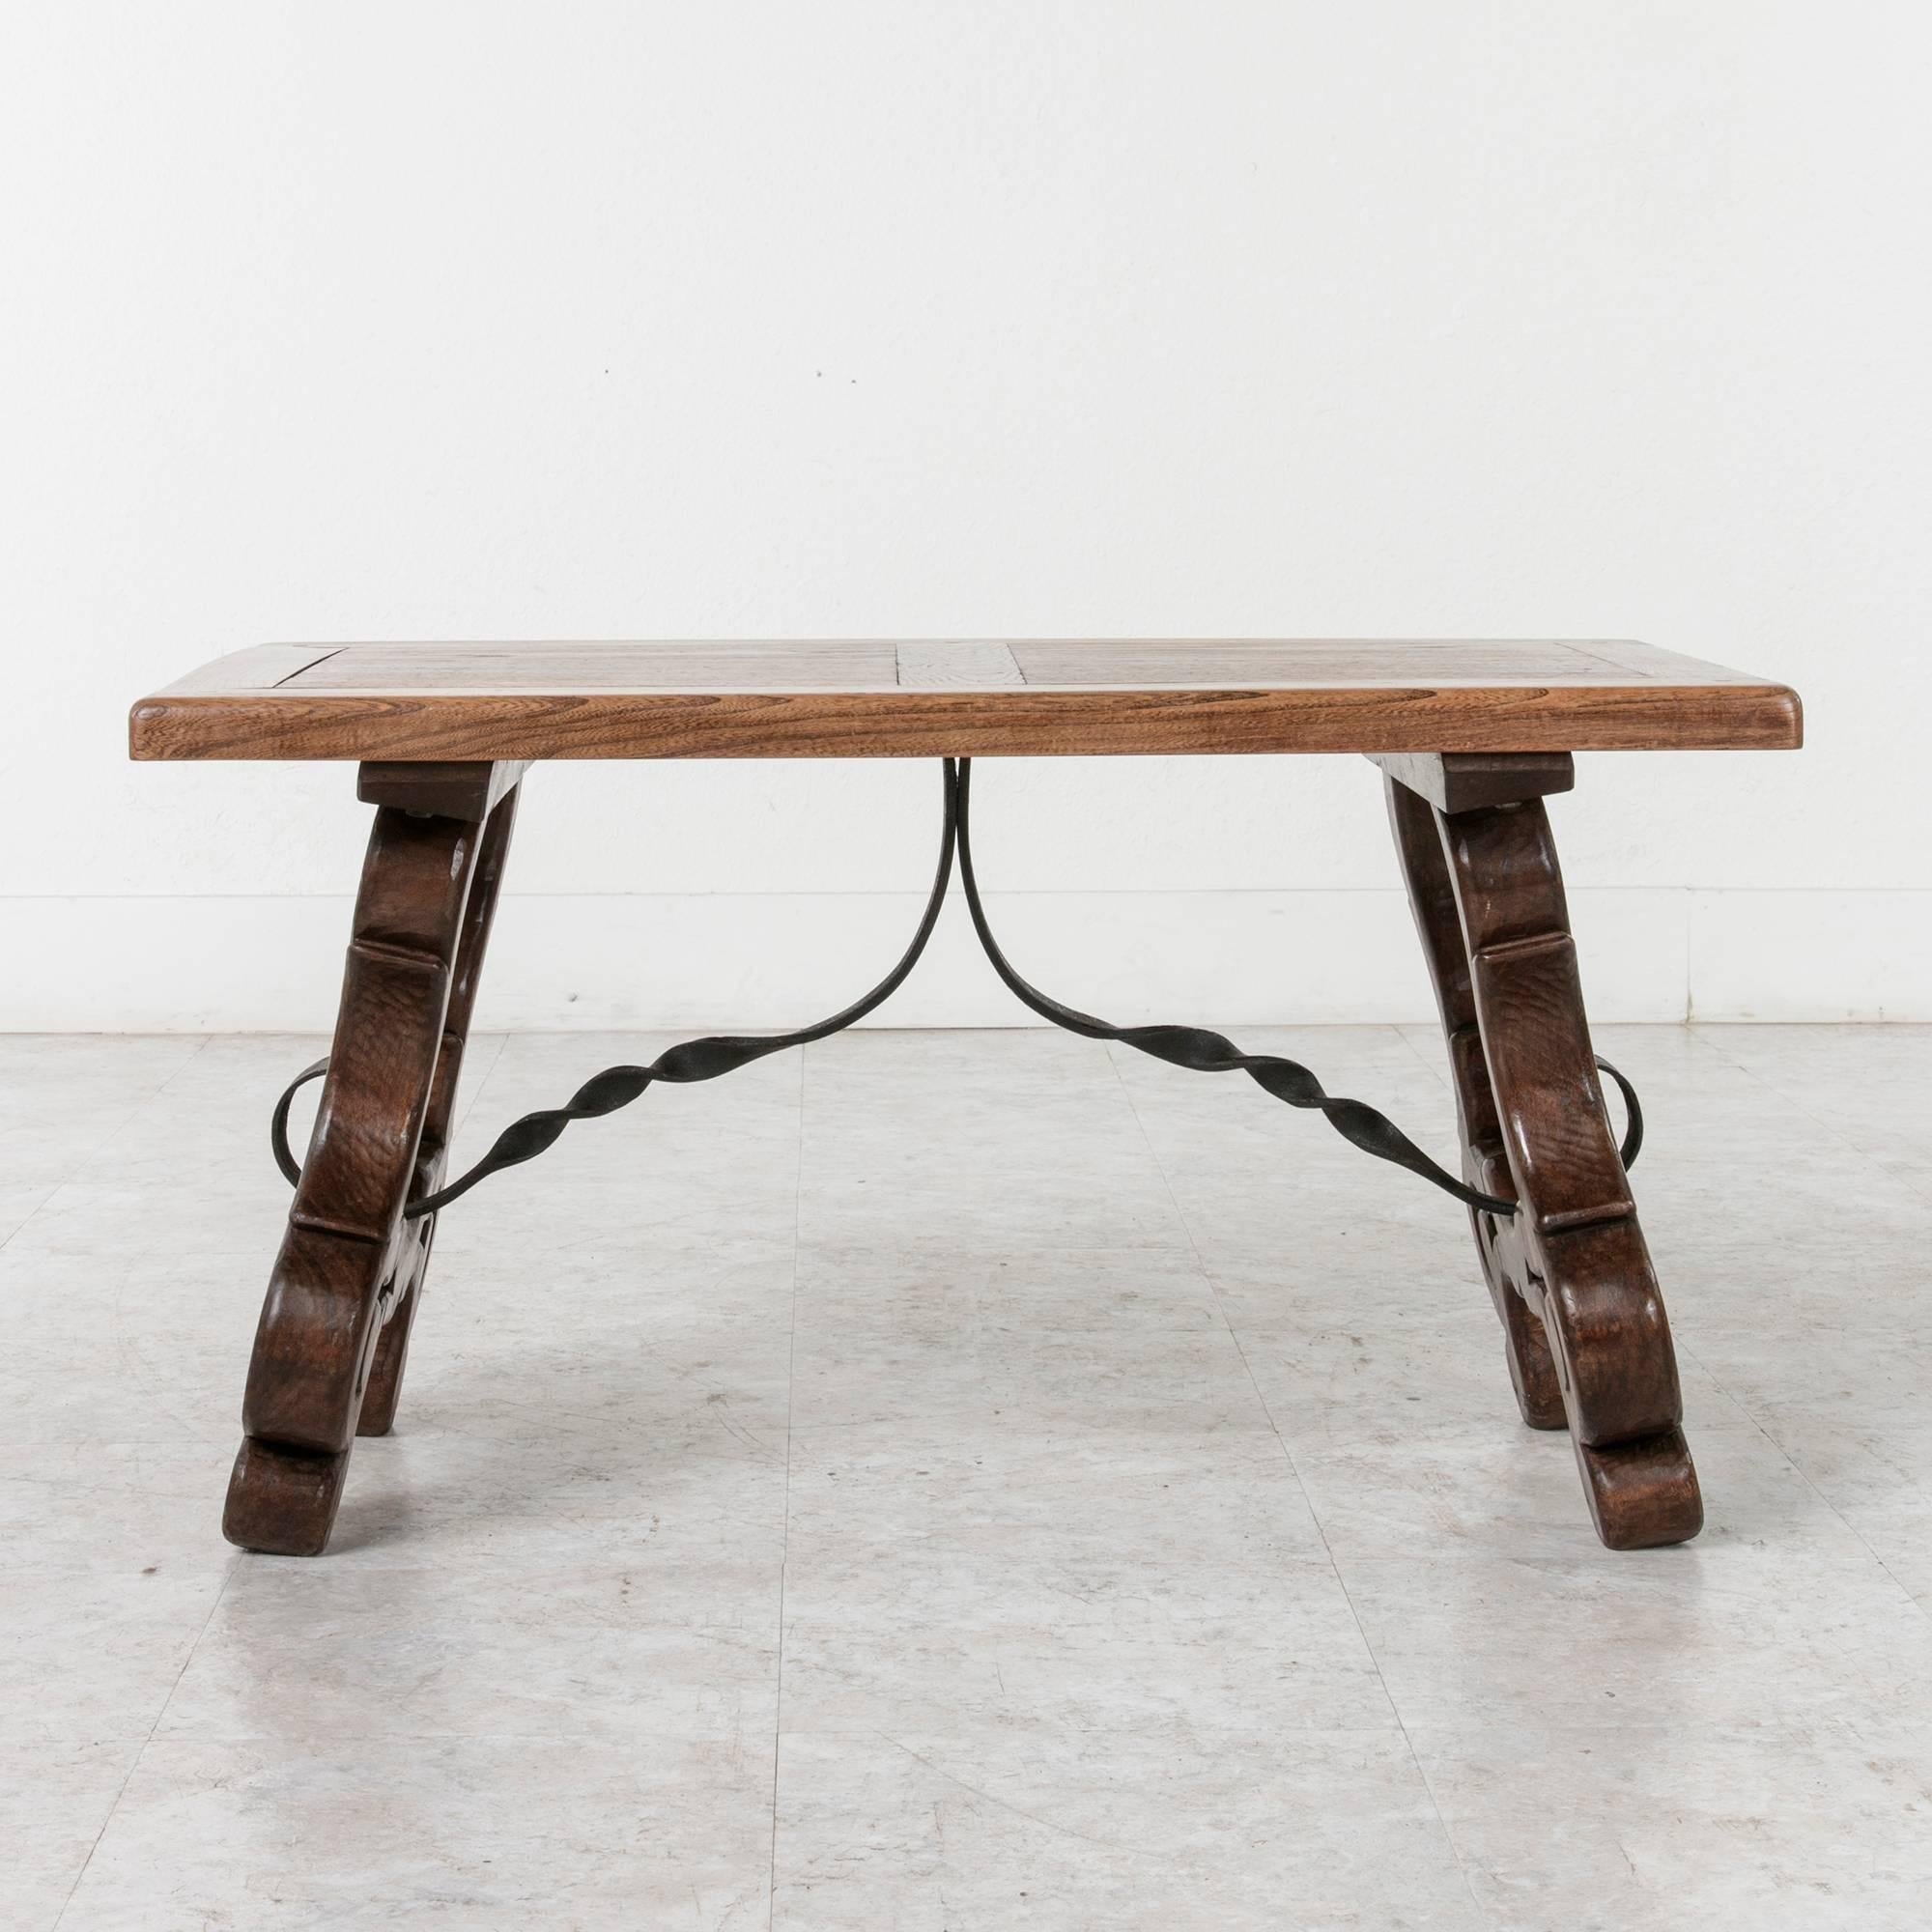 Spanish Colonial Early 20th Century Spanish Style Oak Coffee Table or Bench with Iron Stretcher